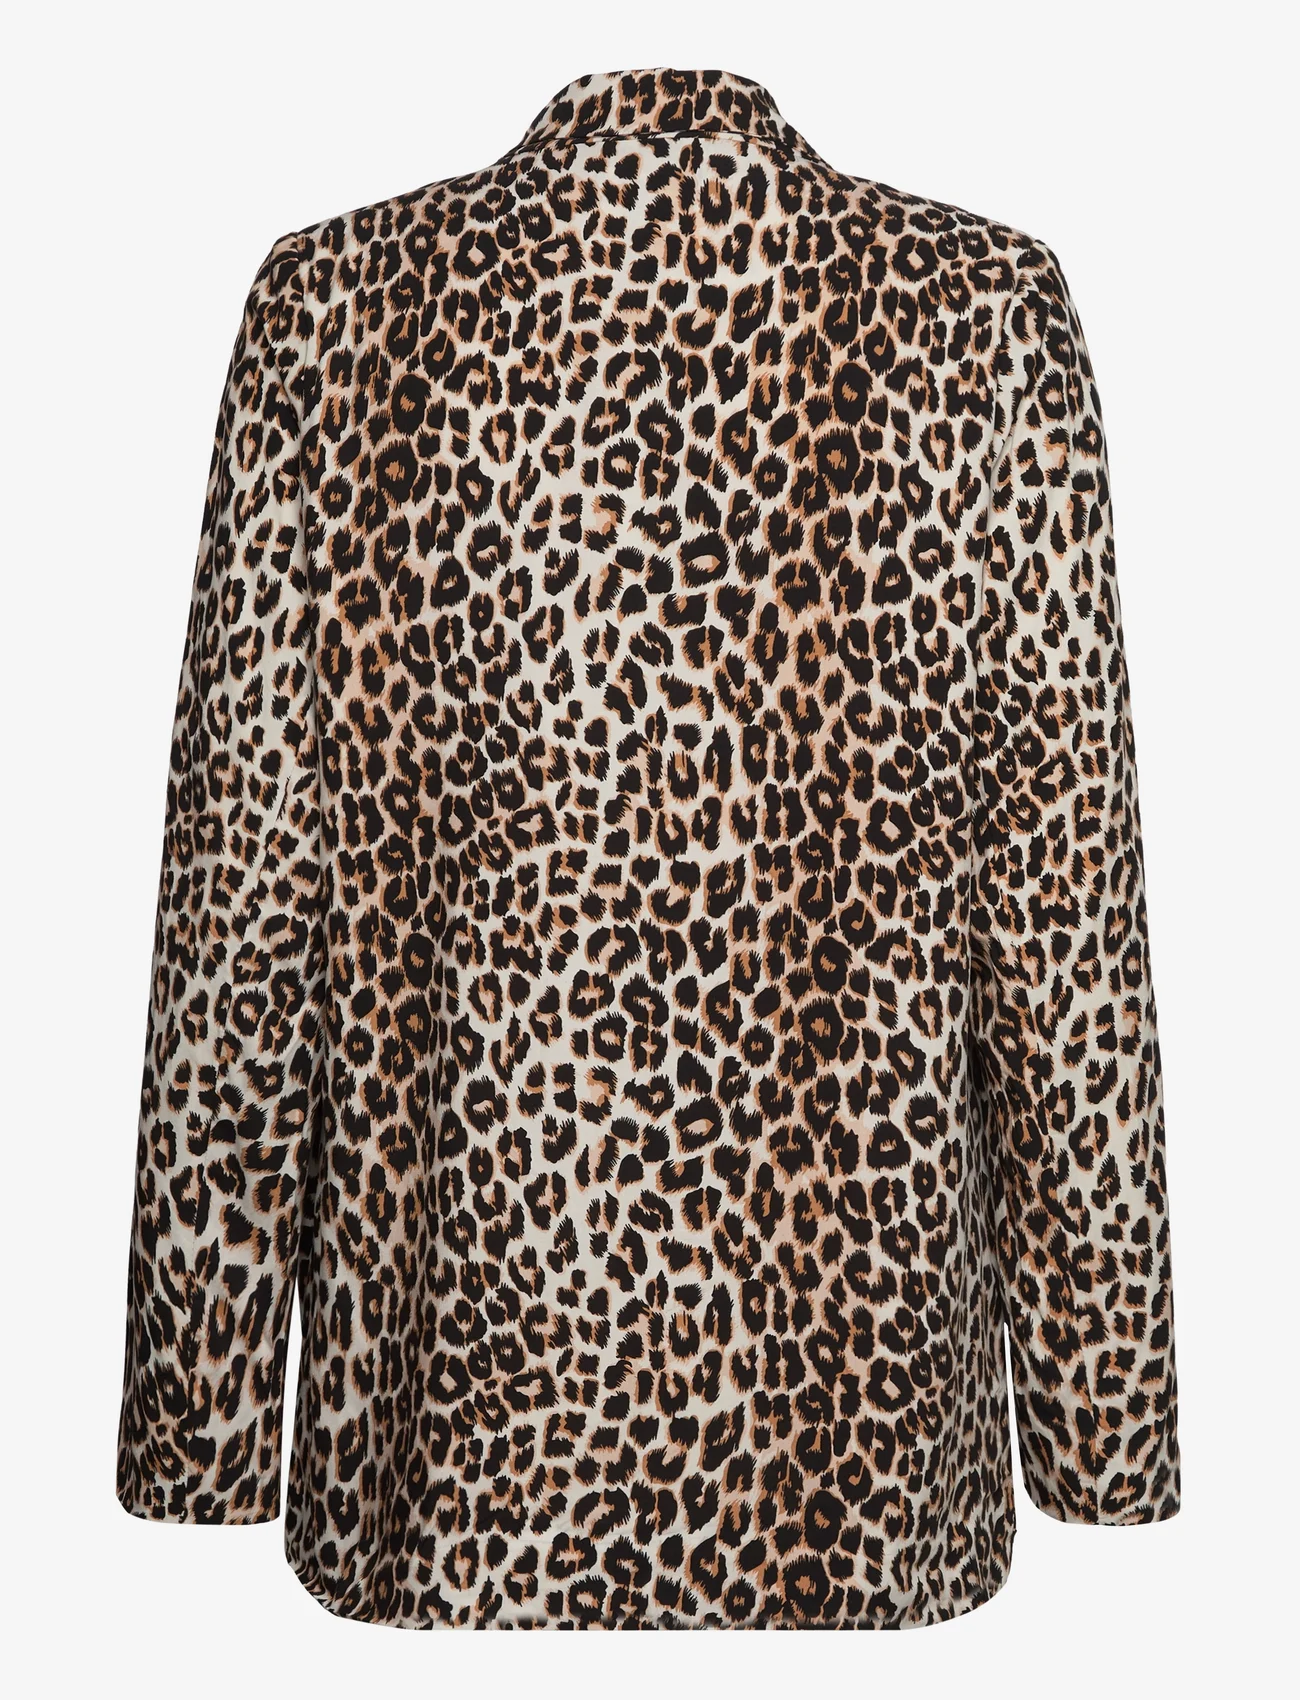 Lollys Laundry - Jolie Blazer - party wear at outlet prices - 72 leopard print - 1